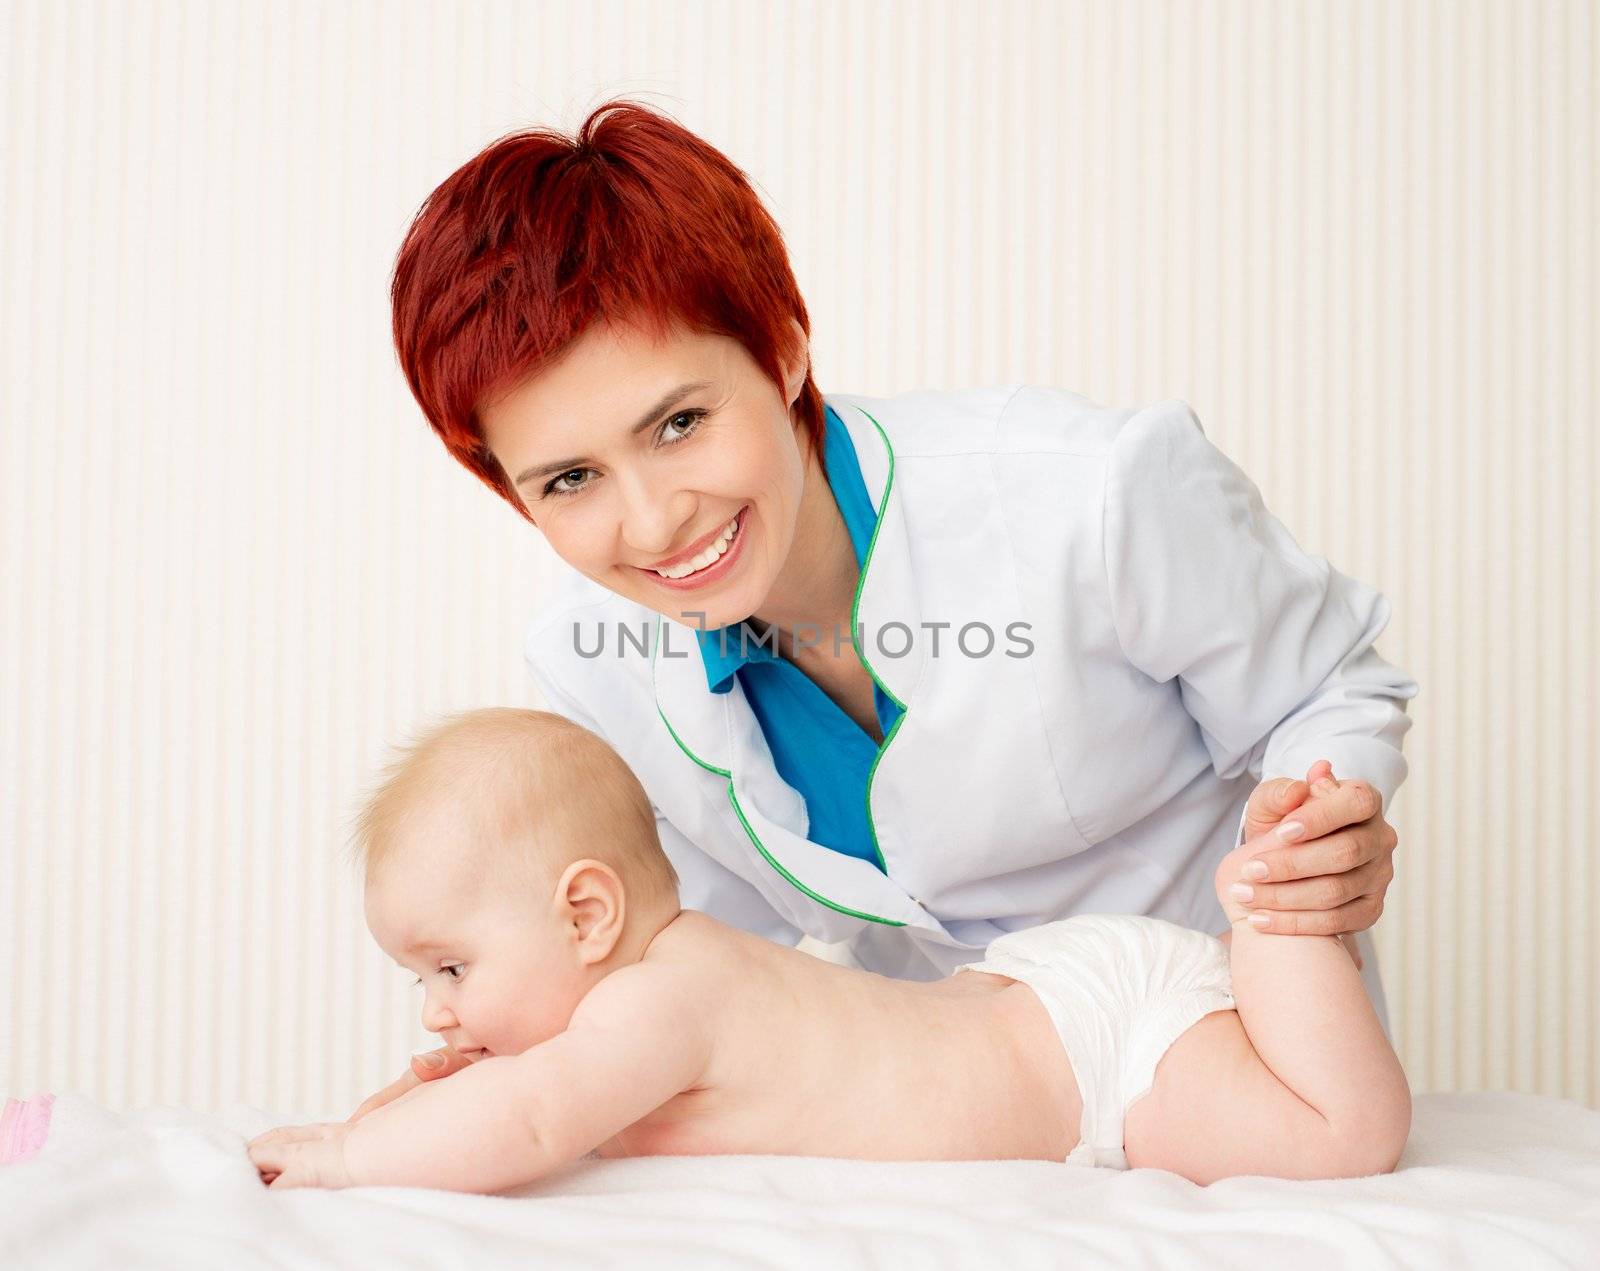 Smiling doctor with beautiful baby